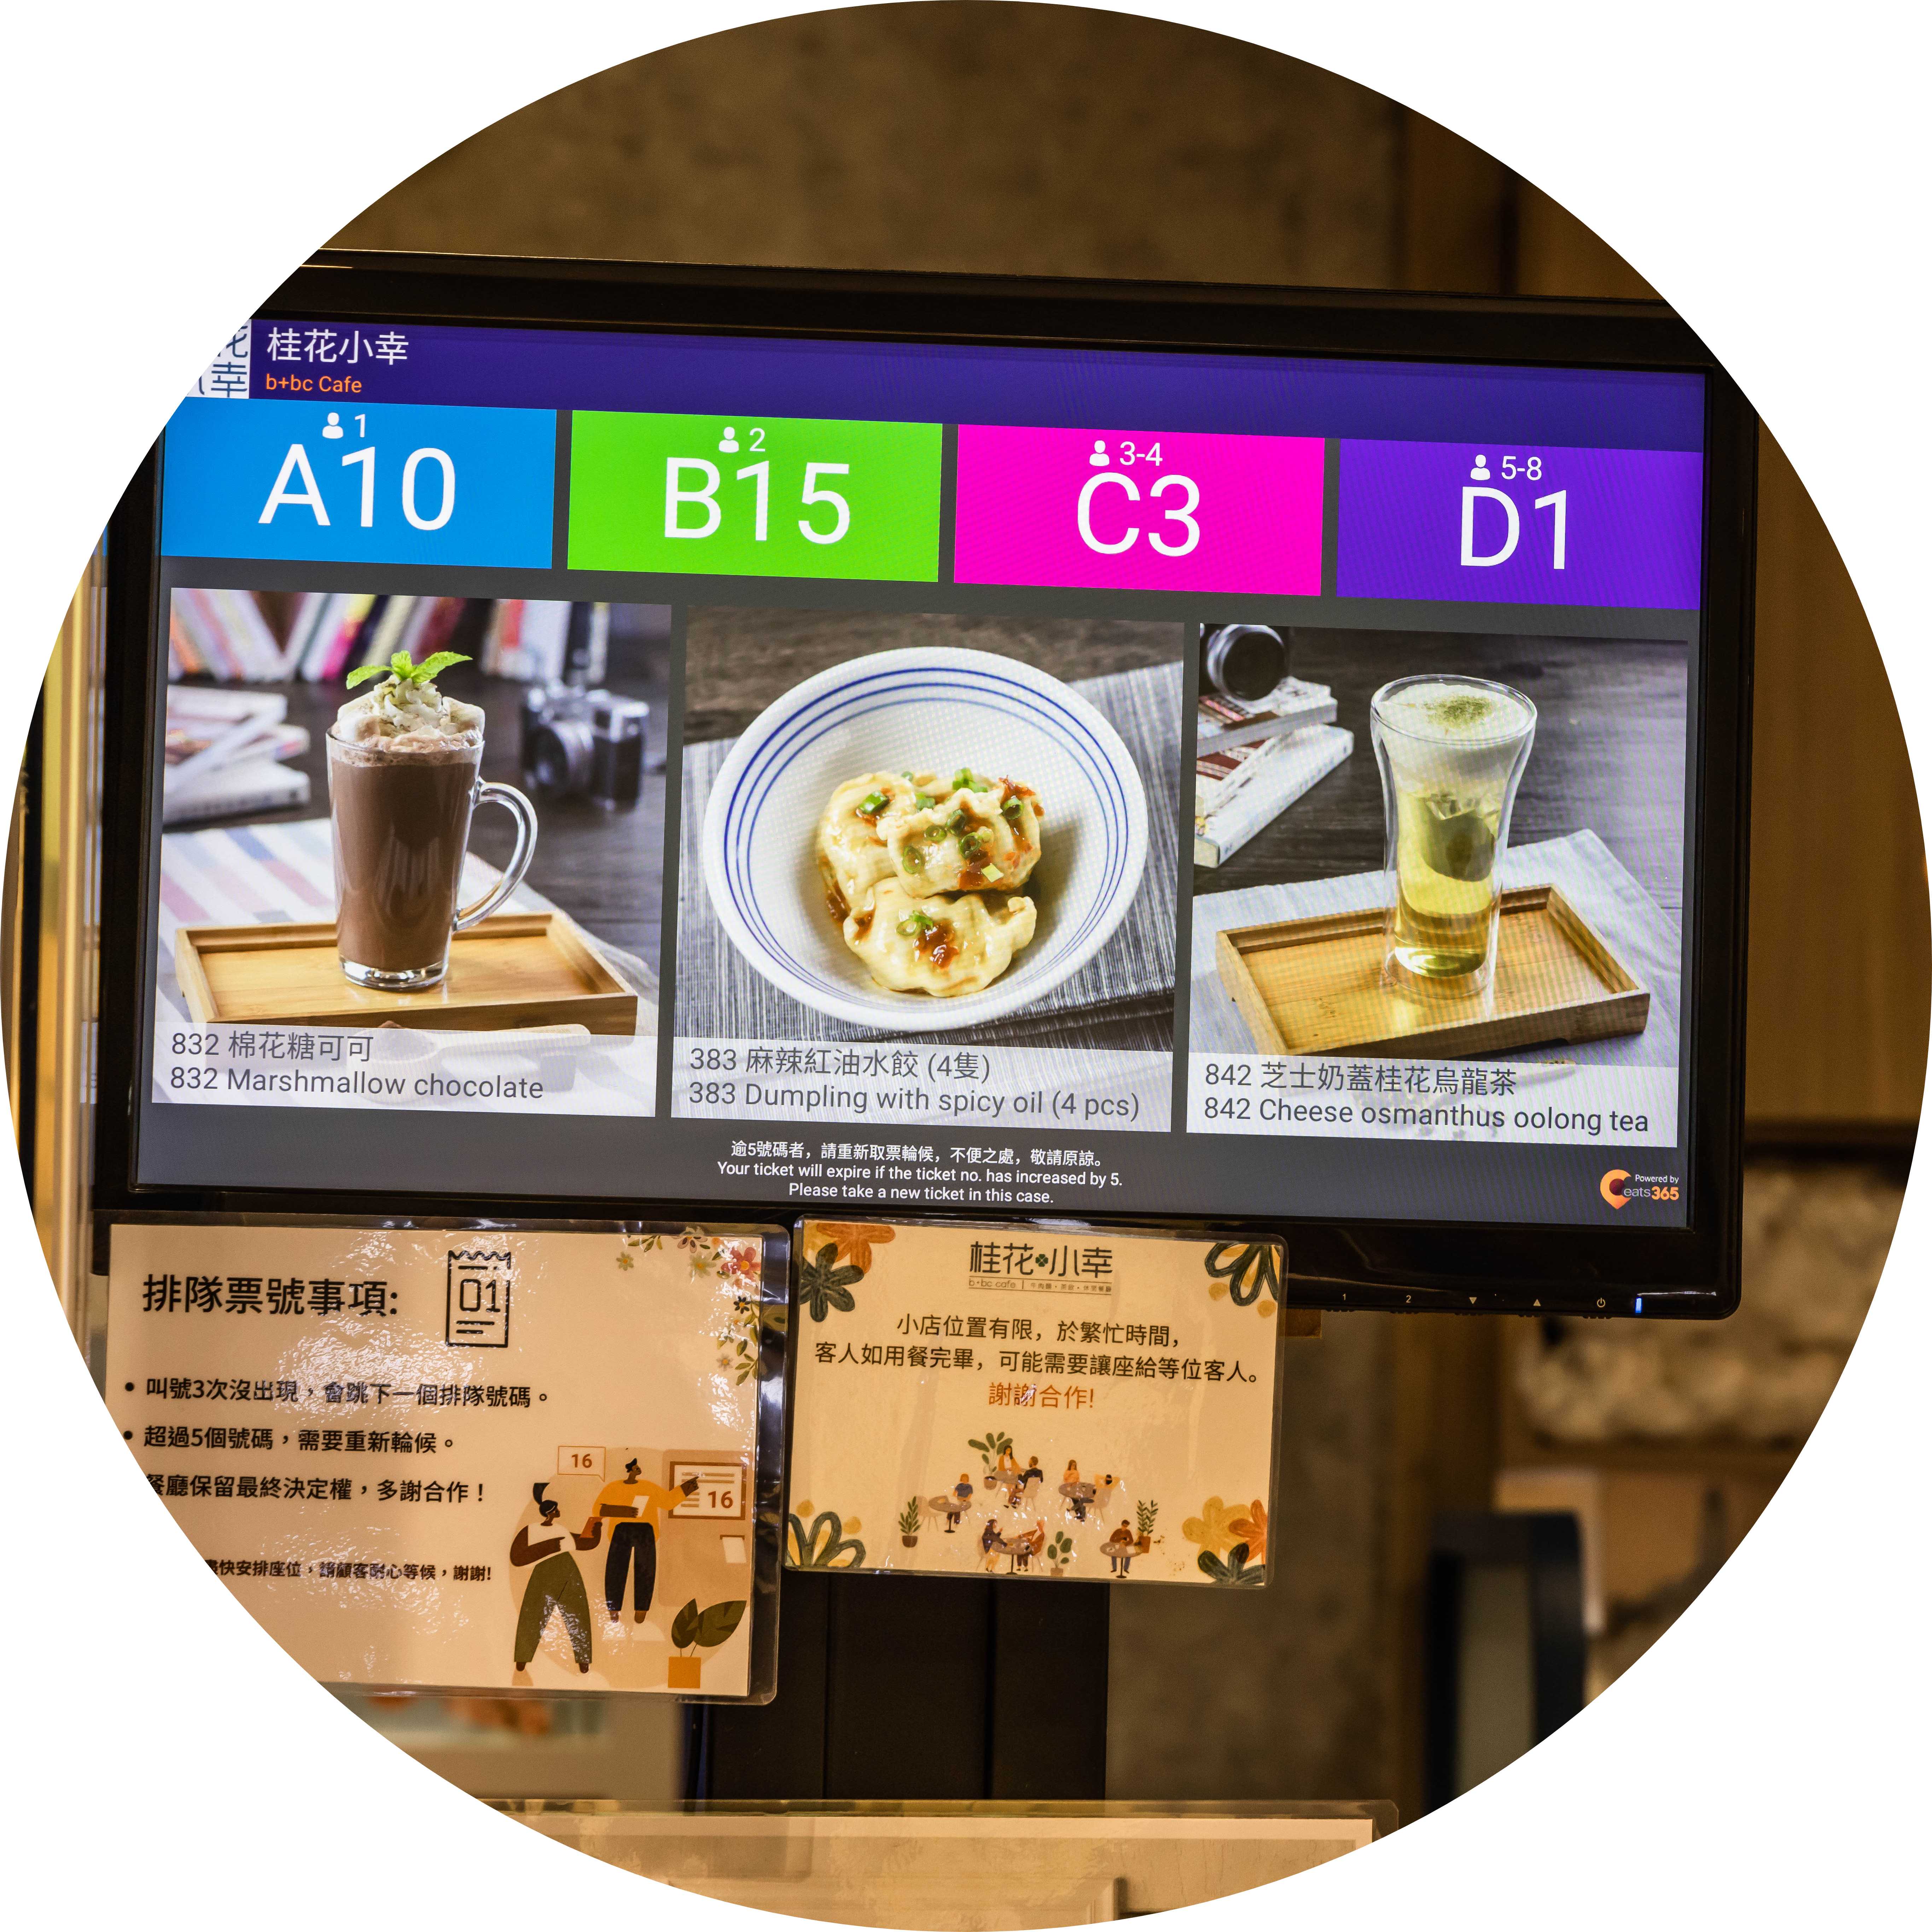 Eats365 Queue Display guaranteed to get the customer’s attention